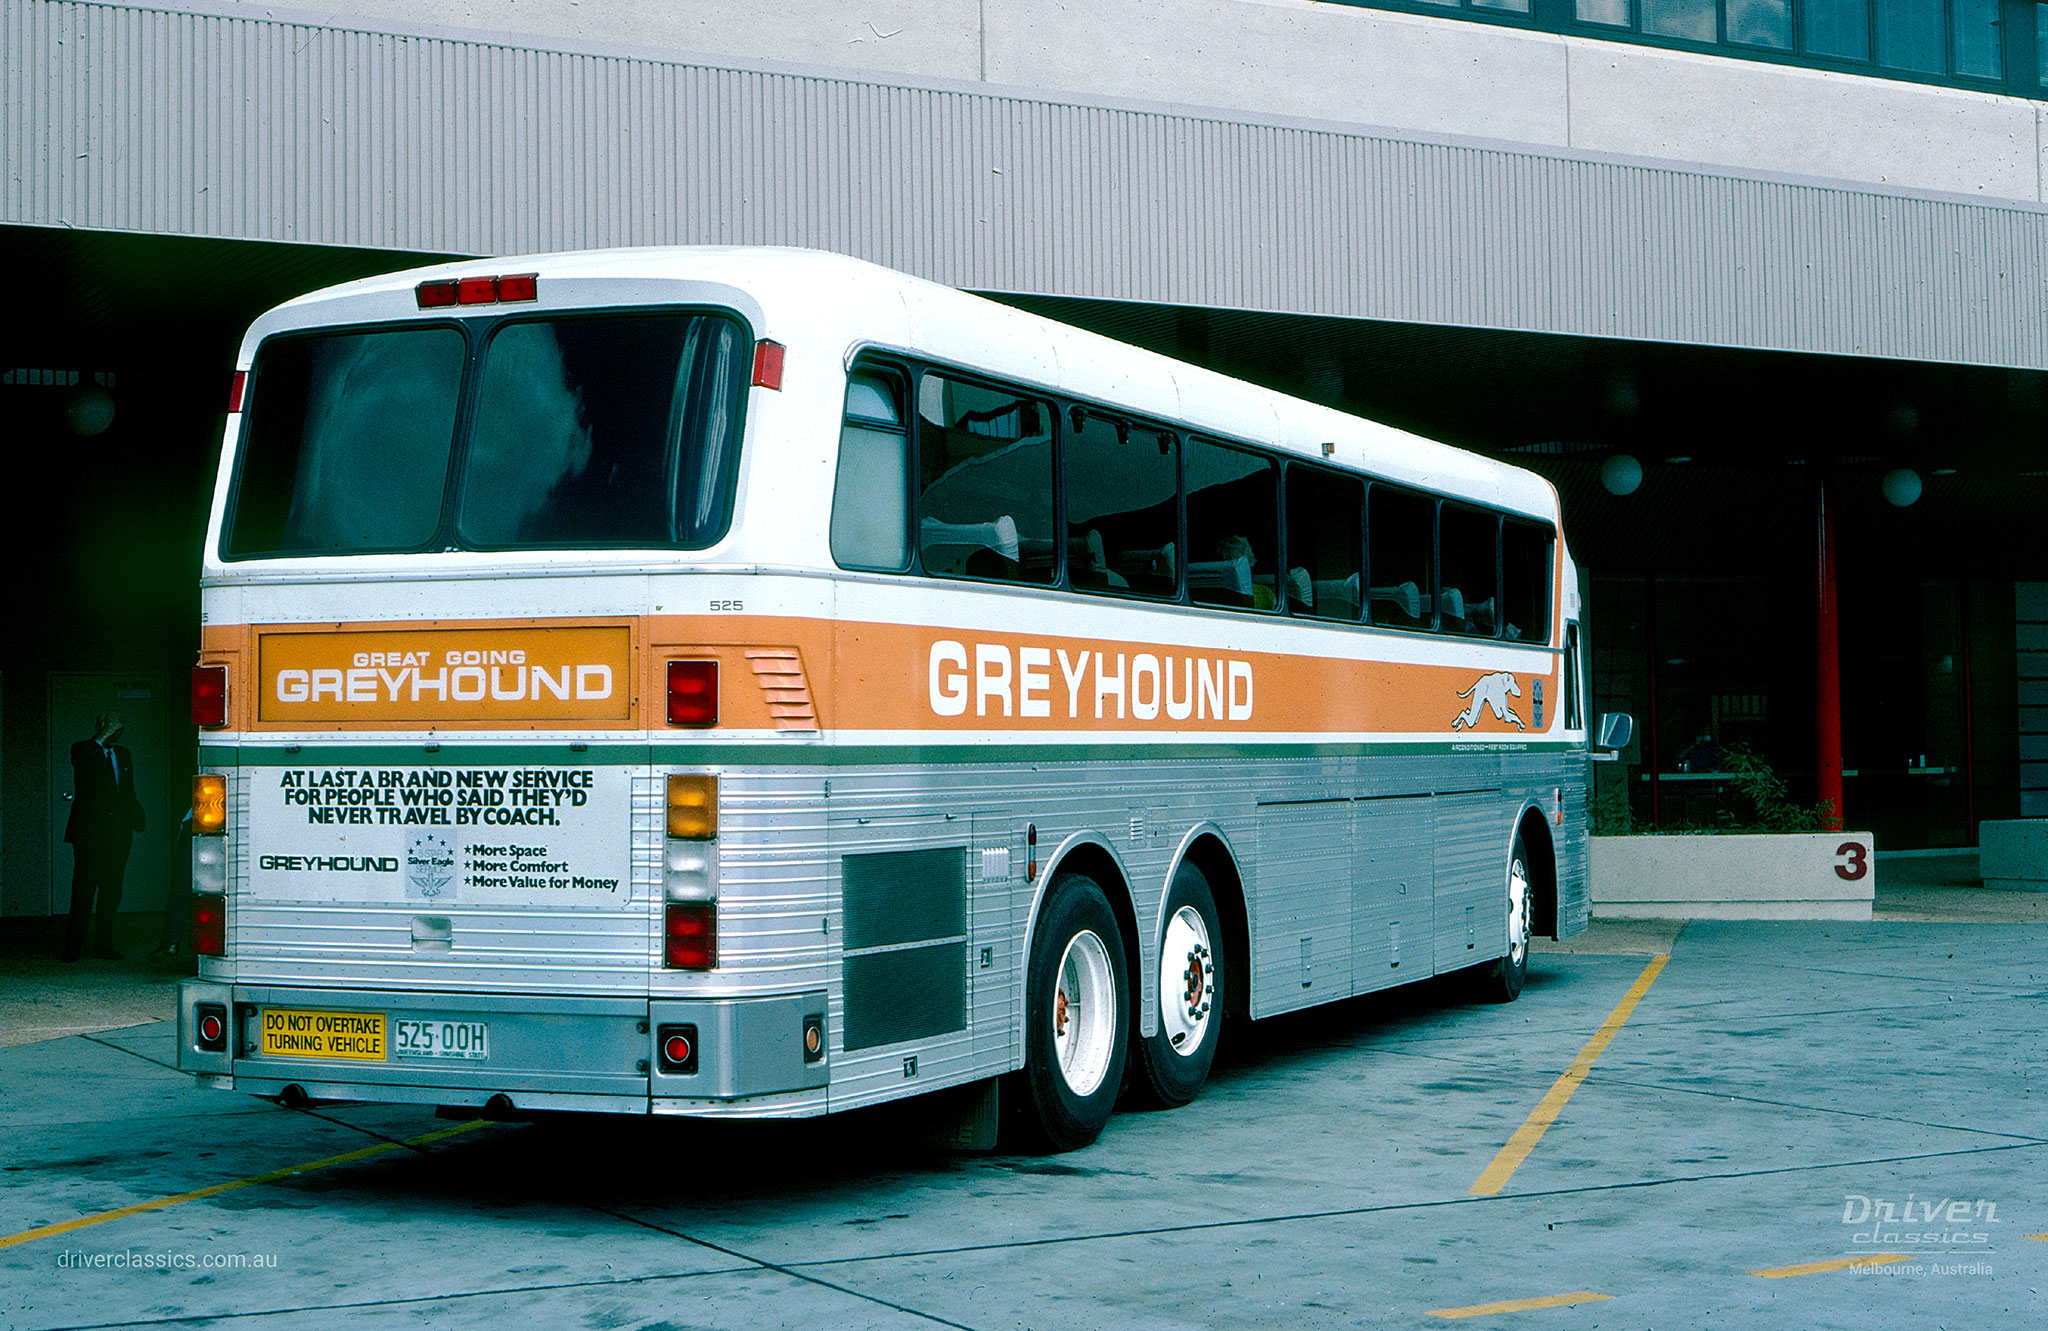 Eagle Model 05 bus, 1982 model with Greyhound livery. Photo taken at Canberra Terminal ACT inFebruary 1984.